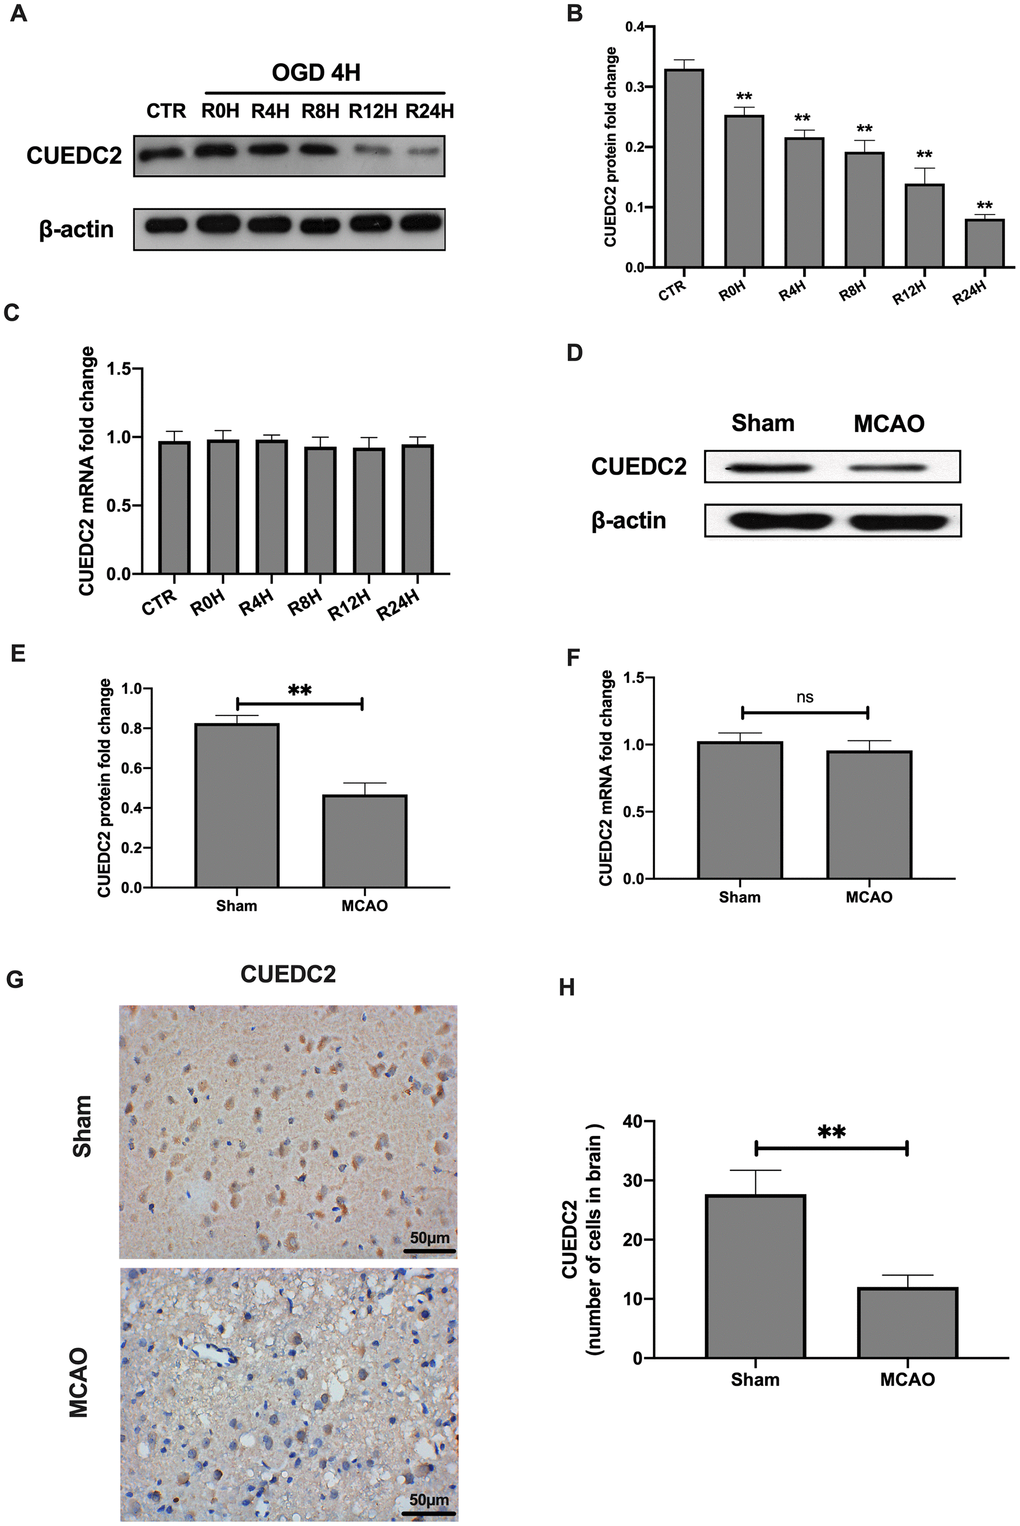 Cerebral I/R induced the downregulation of CUEDC2 expression in brain tissues. (A–C) Protein and mRNA expression of CUEDC2 in neurons as detected by western blotting and PCR assays. (D–F) Protein and mRNA expression of CUEDC2 in brain tissues as assayed by western blotting and PCR. (G, H) Protein expression of CUEDC2 in brain tissues as assayed by immunohistochemical staining. Scale bar = 50 μm. CTR, control; CUEDC2: CUE domain-containing 2; OGD/R: oxygen-glucose deprivation (4 hours) and reperfusion (0,4,8,12, and 24 hours); MCAO, middle cerebral artery occlusion. All data are presented as the mean value ± SD. *p